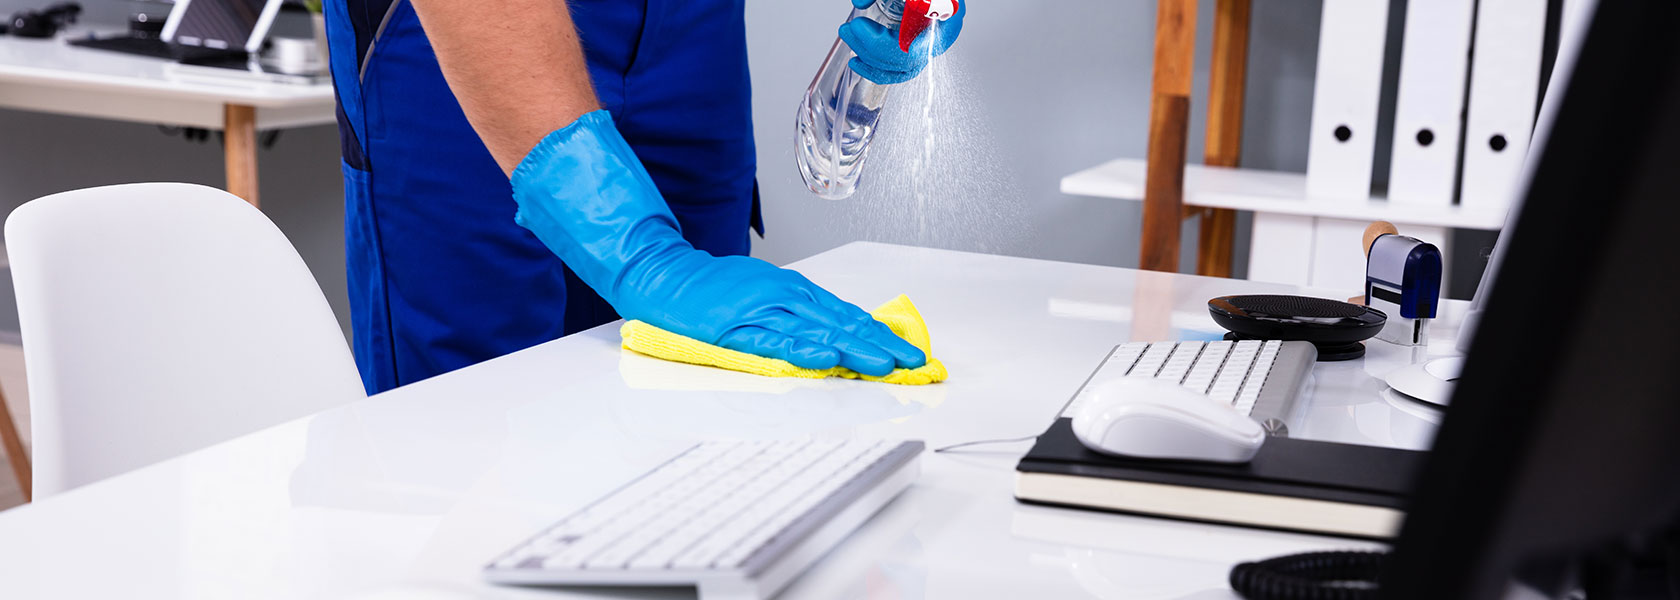 Office Cleaning Services Company in Dubai